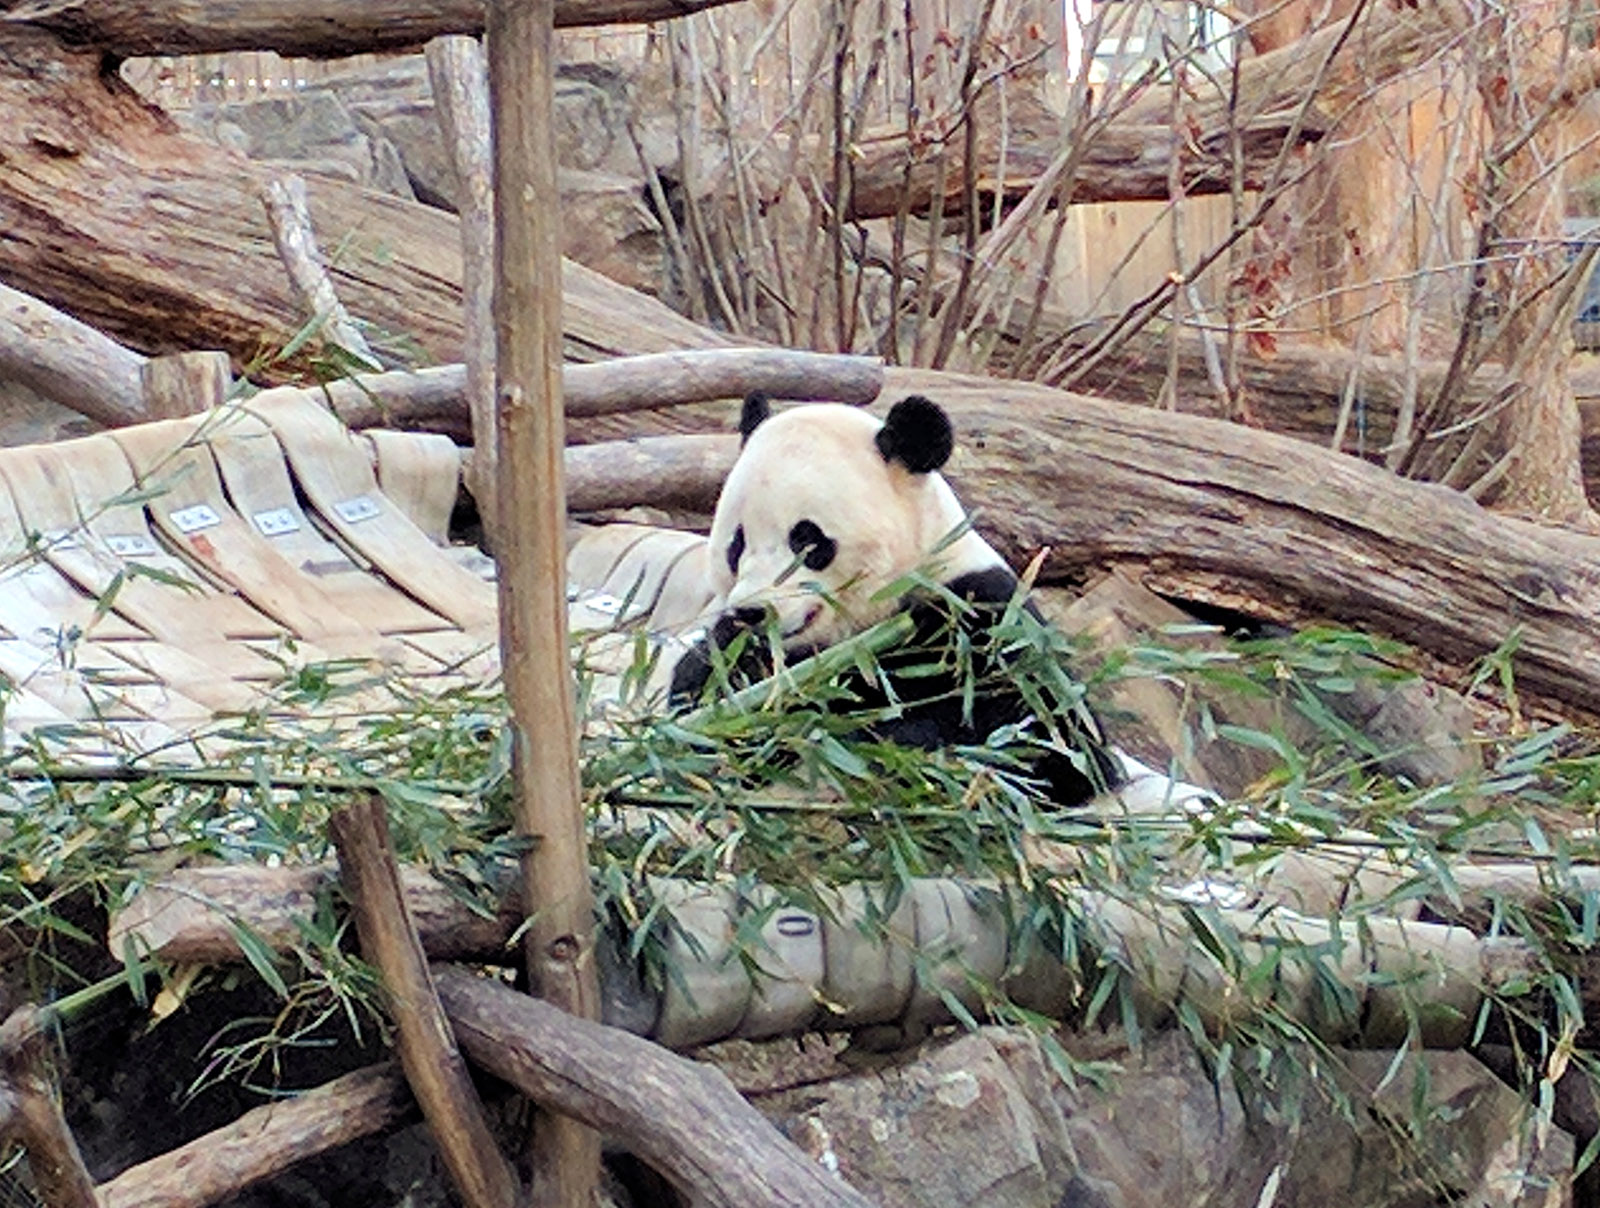 Giant panda Bao Bao enjoys some bamboo during her final hours at the National Zoo. She was set to depart for China on Tuesday, Feb. 21, 2017. (WTOP/Ginger Whitaker)